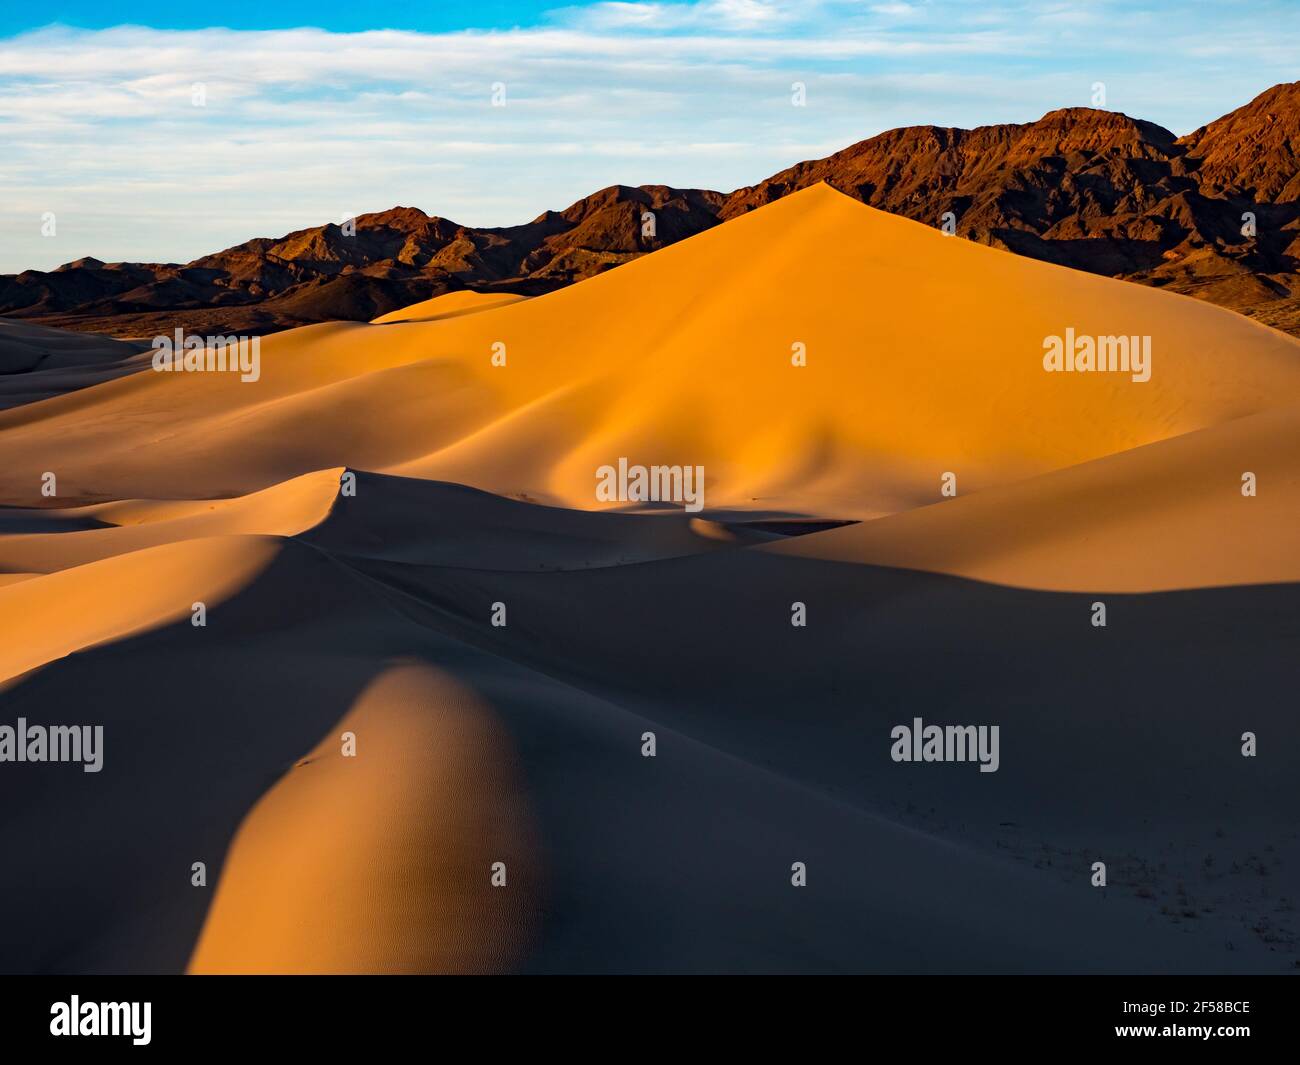 The Ibex dunes in remote Death Valley National Park, California, USA ...